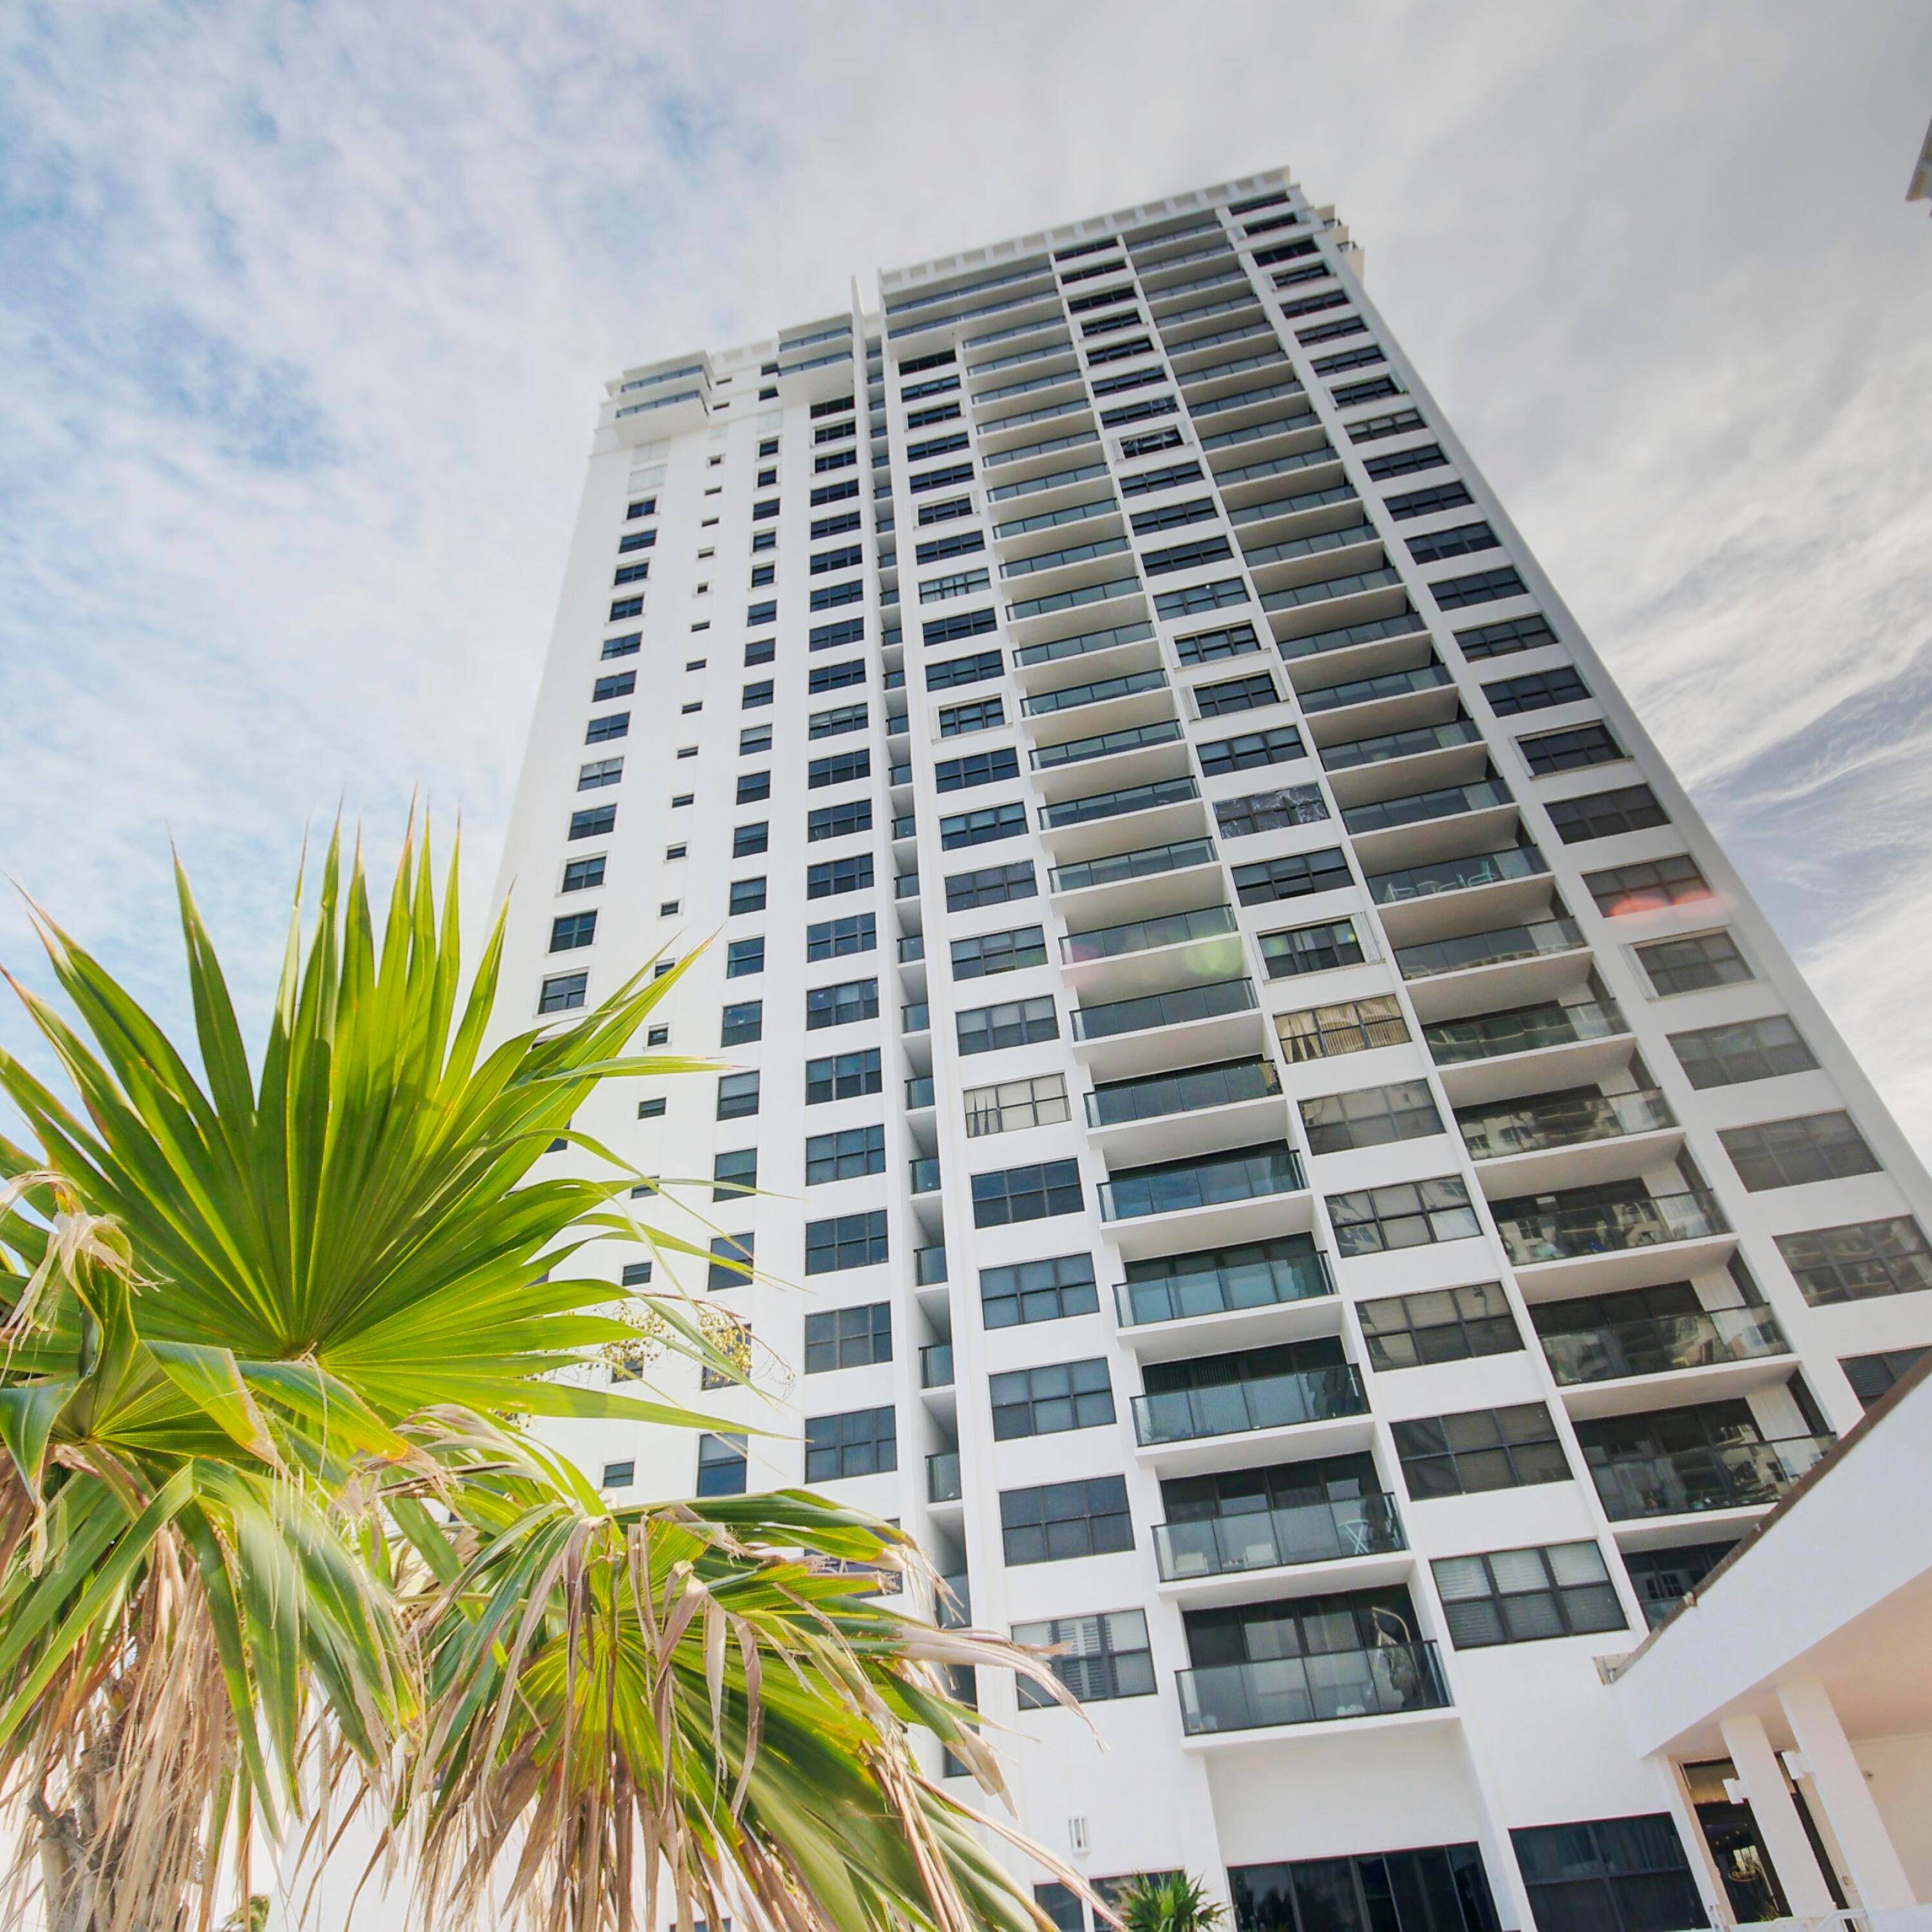 Stunning direct unobstructed ocean views from the 15th floor Enjoy the deep blue colors of the ocean from your large Glass Balcony overlooking not only the ocean but the wide ...